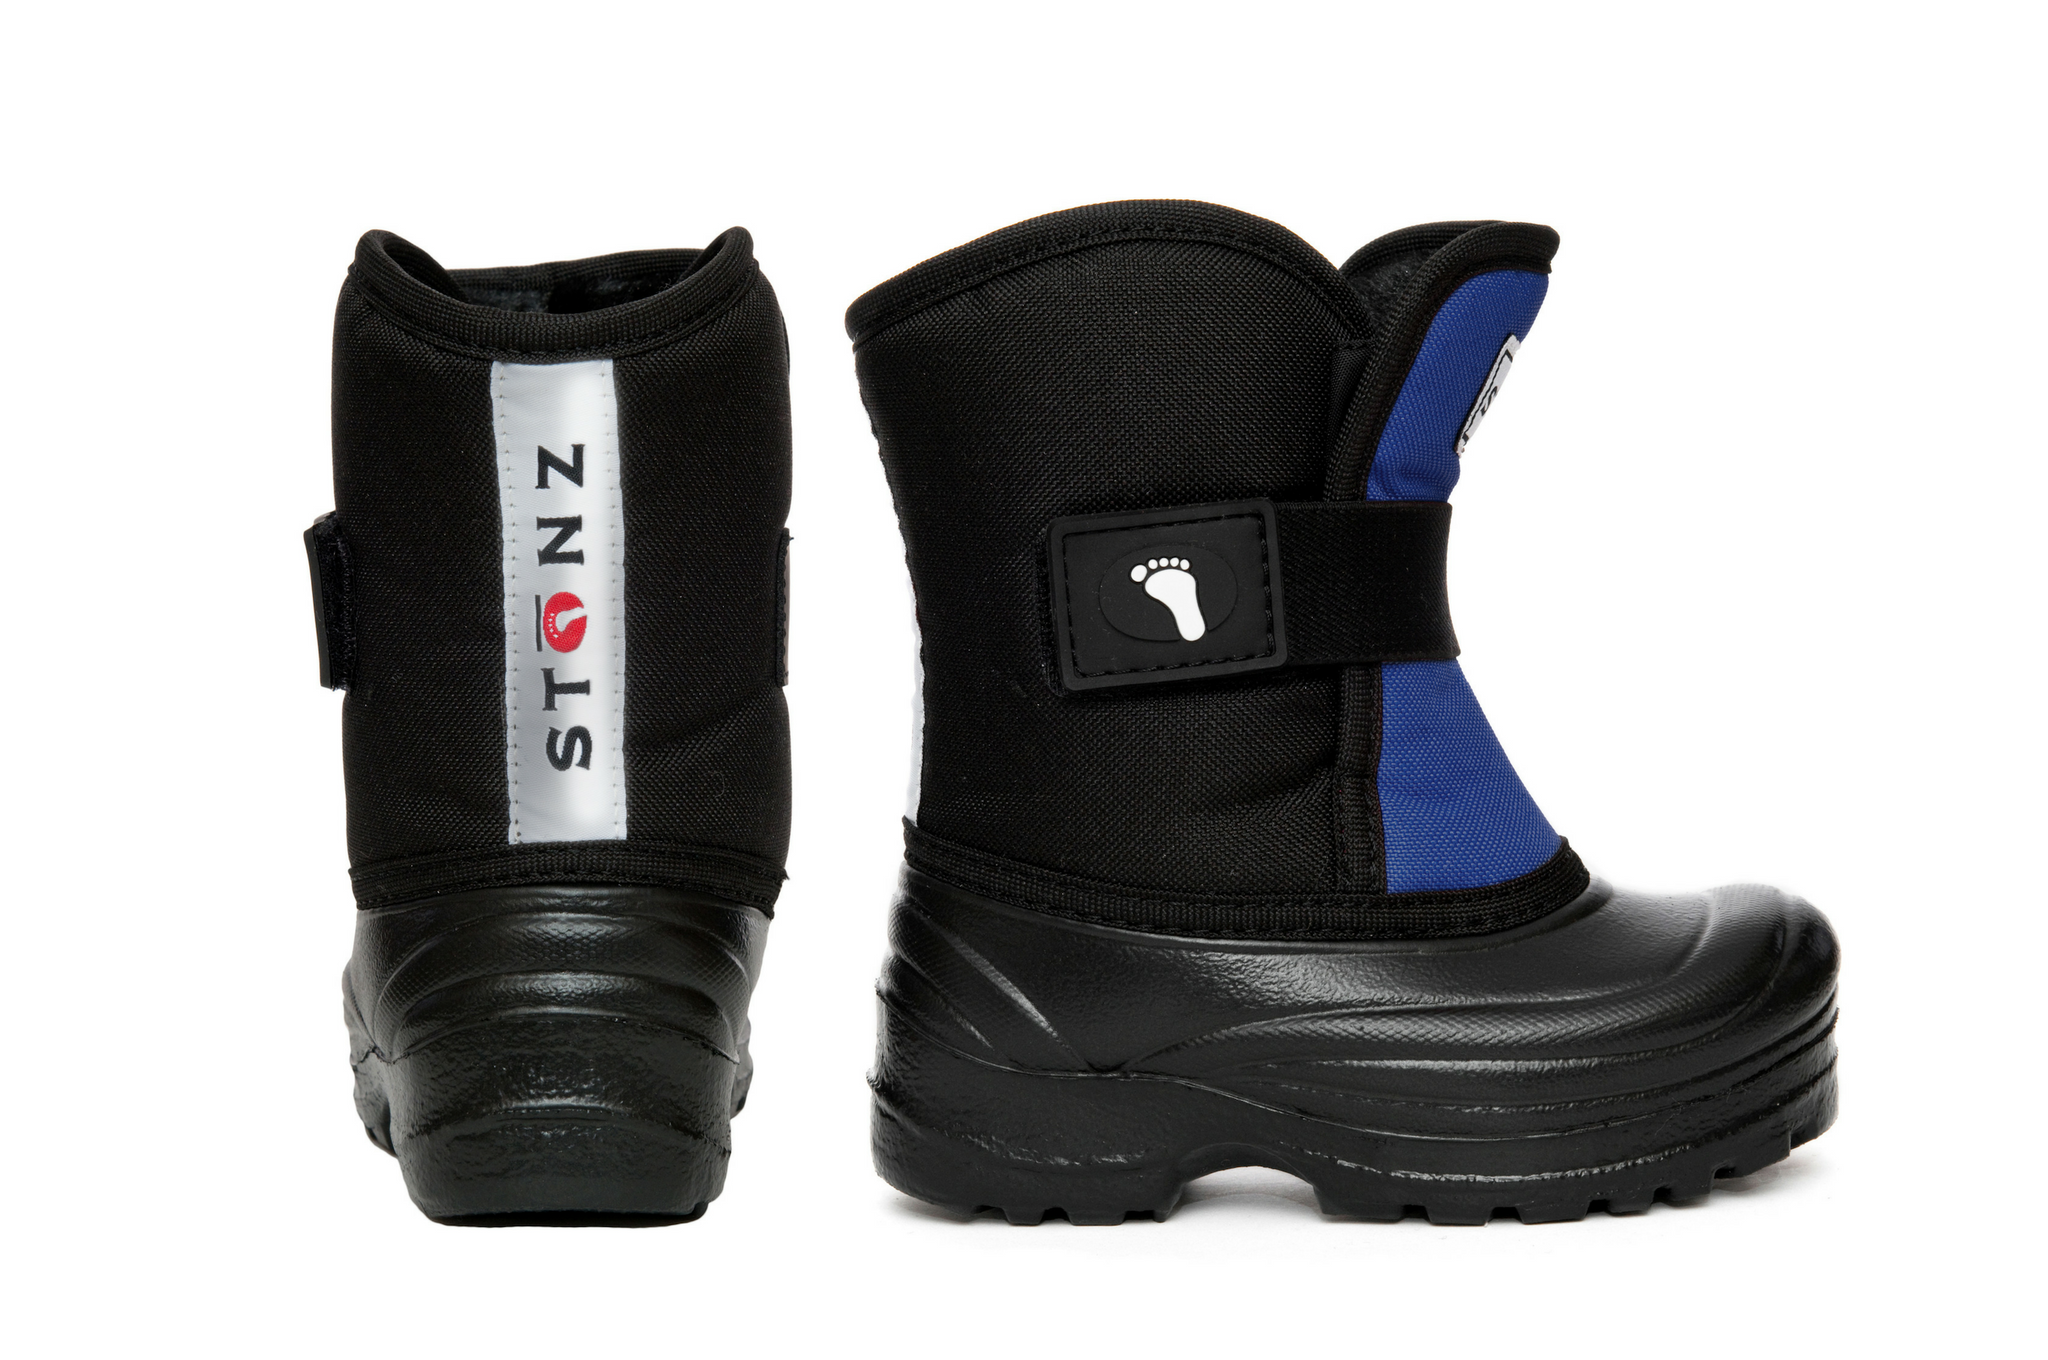 Scout Grey/Black - - | Winter Weather-resistant Boots | Reflective Toddlers Stonz for Shoes